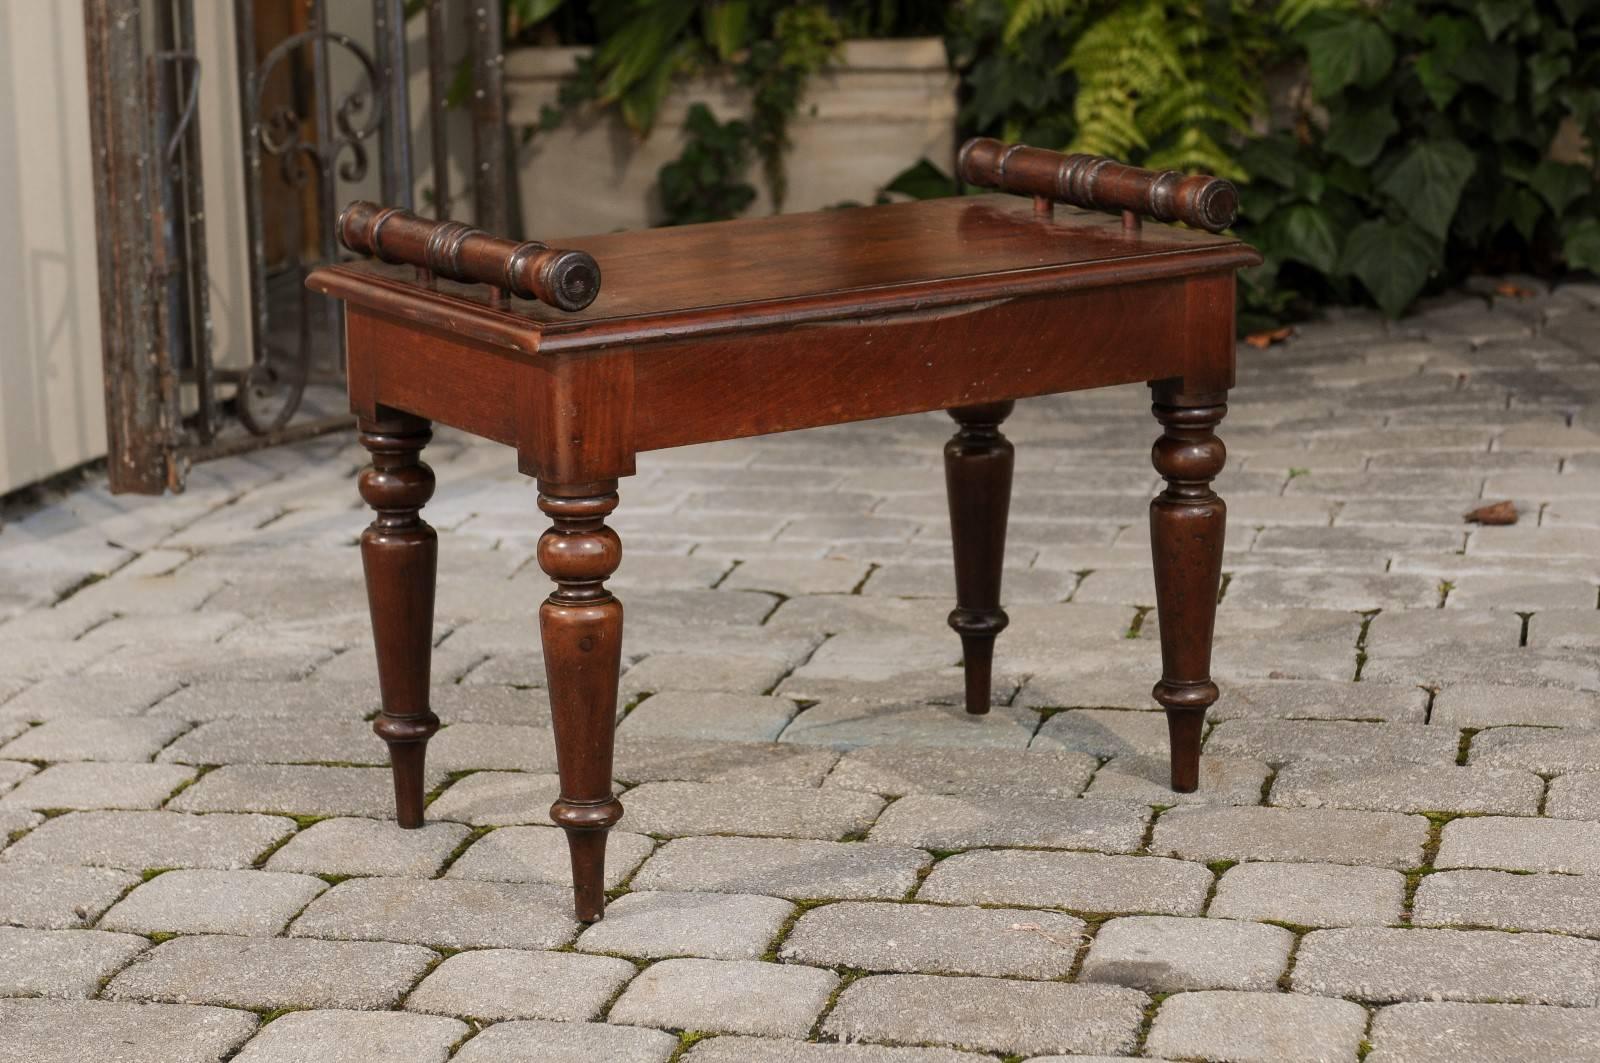 An English petite mahogany hall bench with cylindrical supports and turned legs from the second half of the 19th century. This English hall bench features a rectangular single planked seat, flanked with cylindrical lateral supports. The bench is